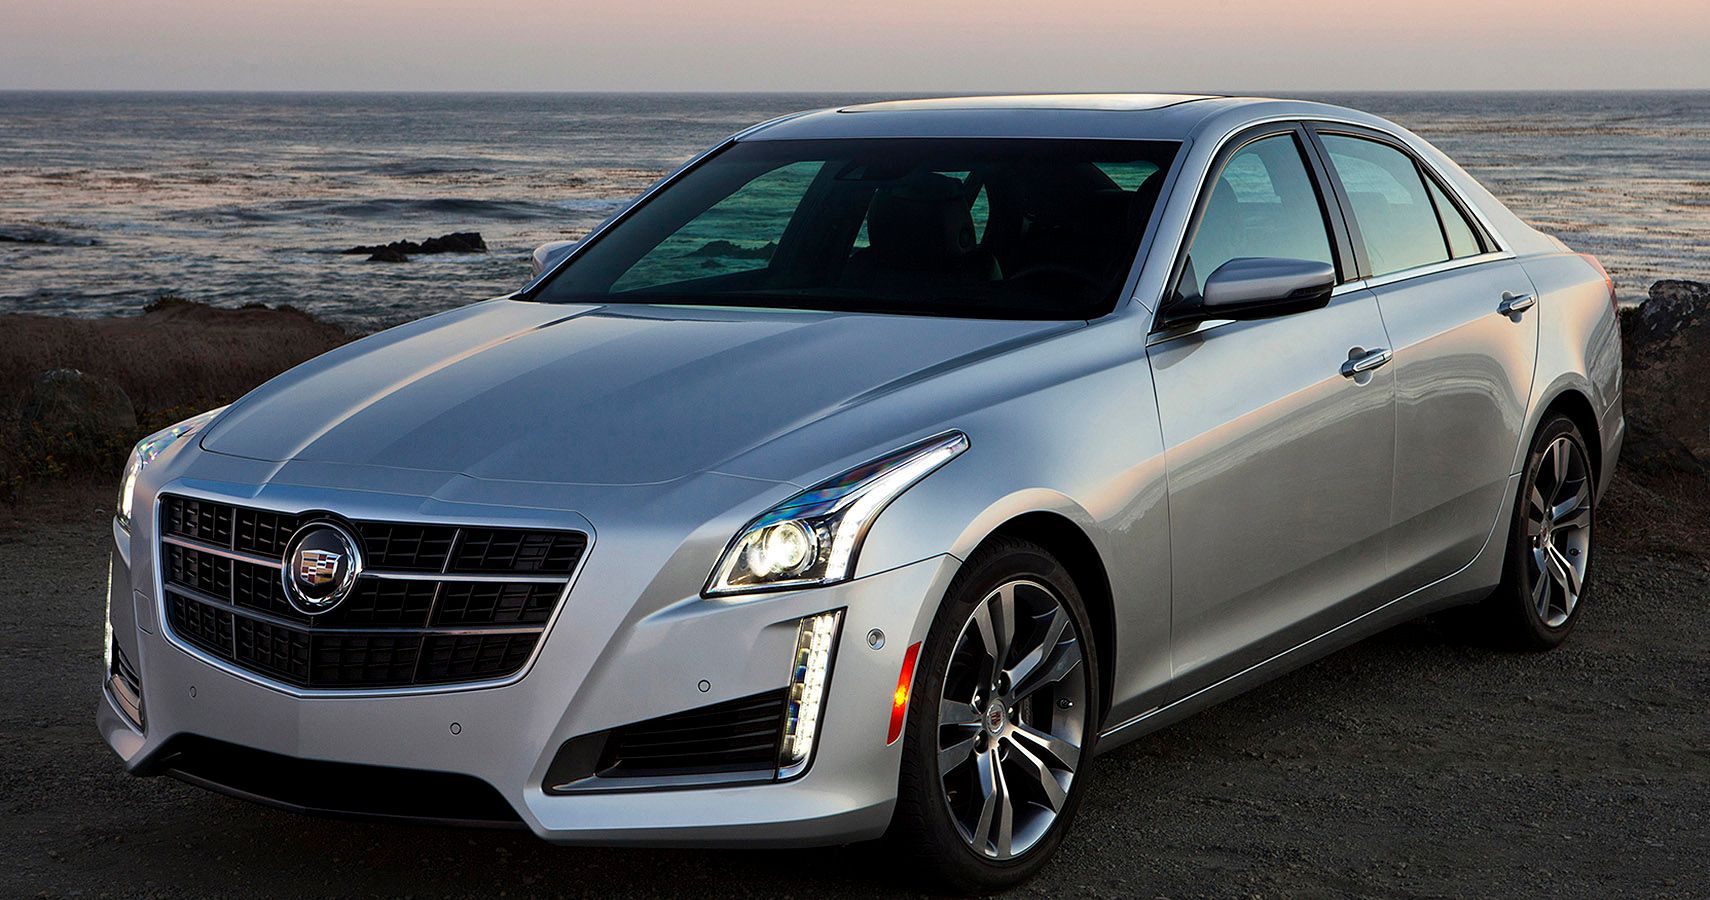 Silver 2019 Cadillac CTS by a water body